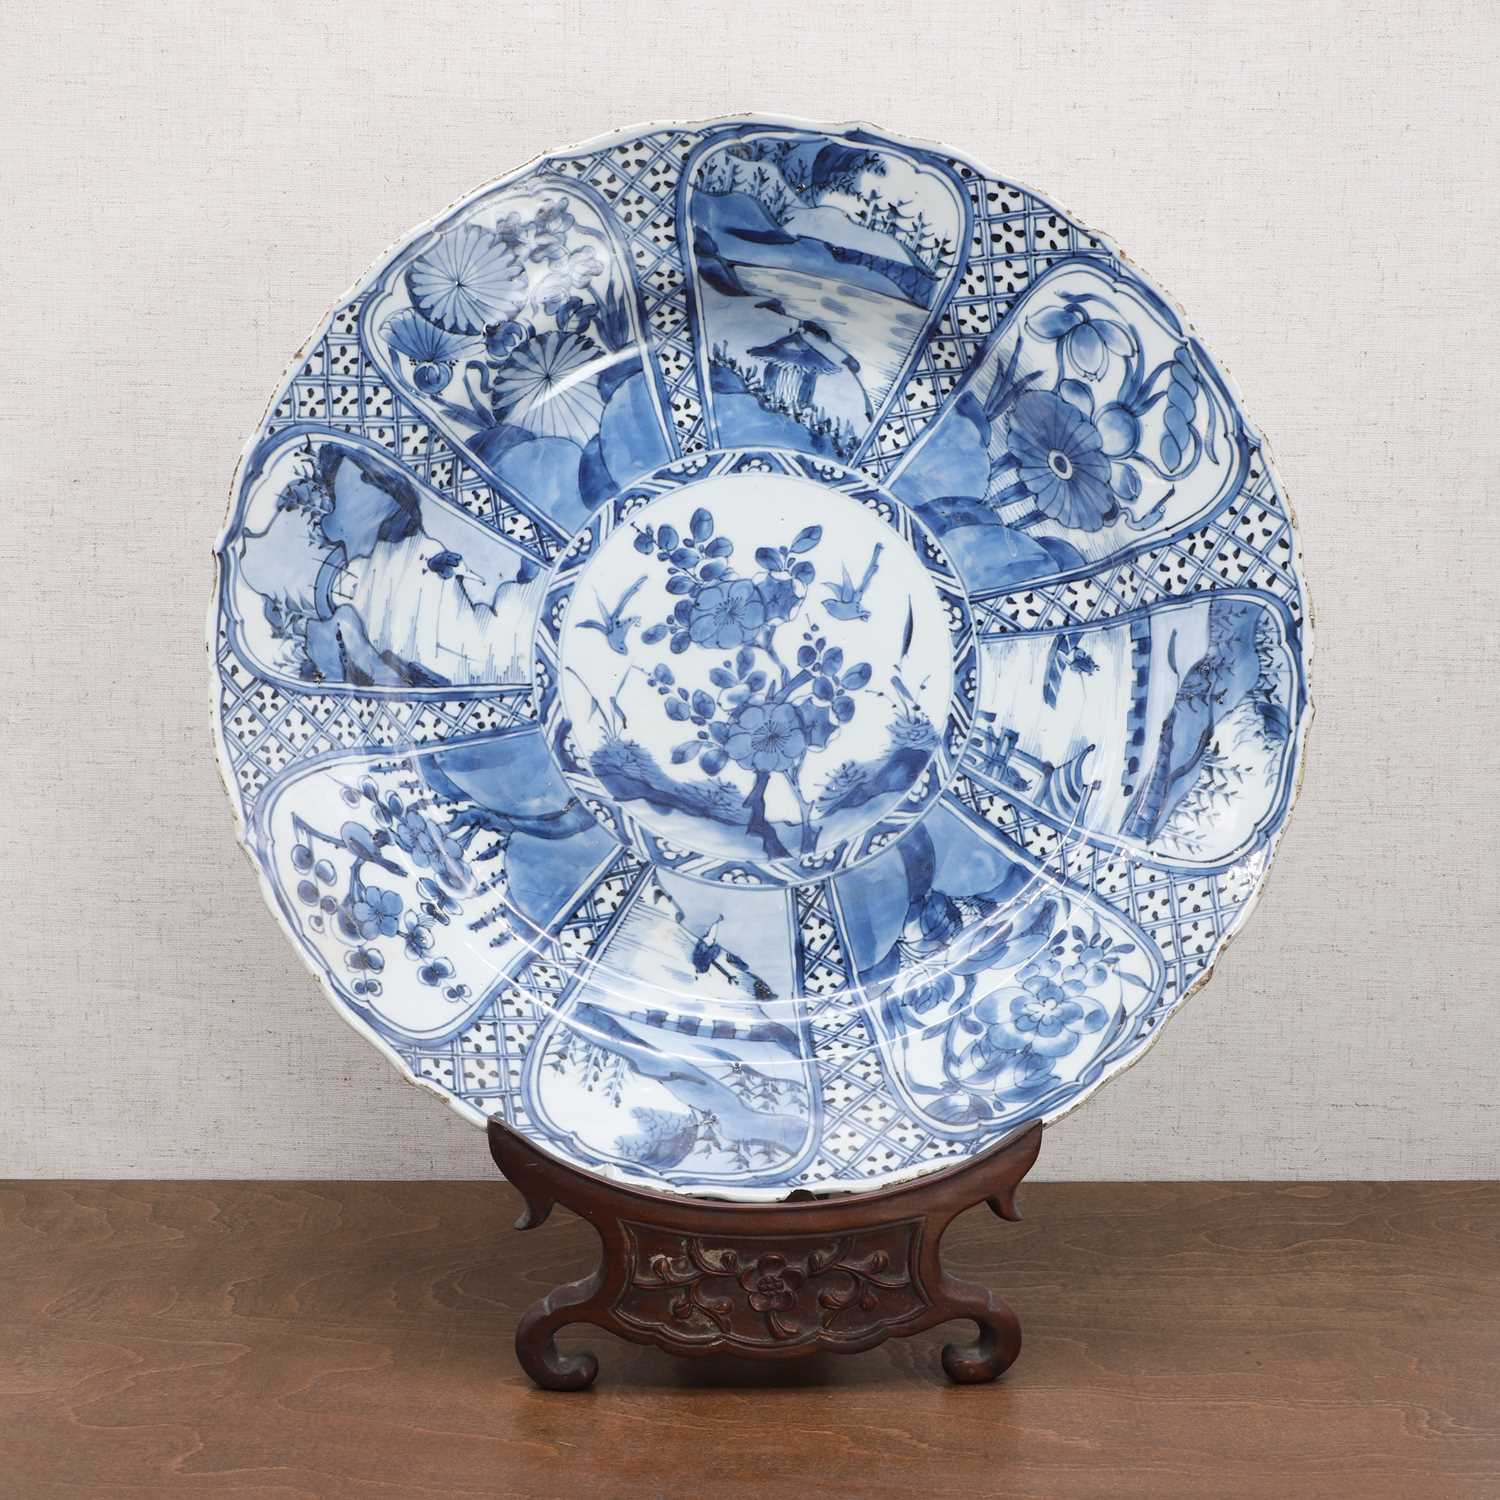 Lot 34 - A Chinese export blue and white charger